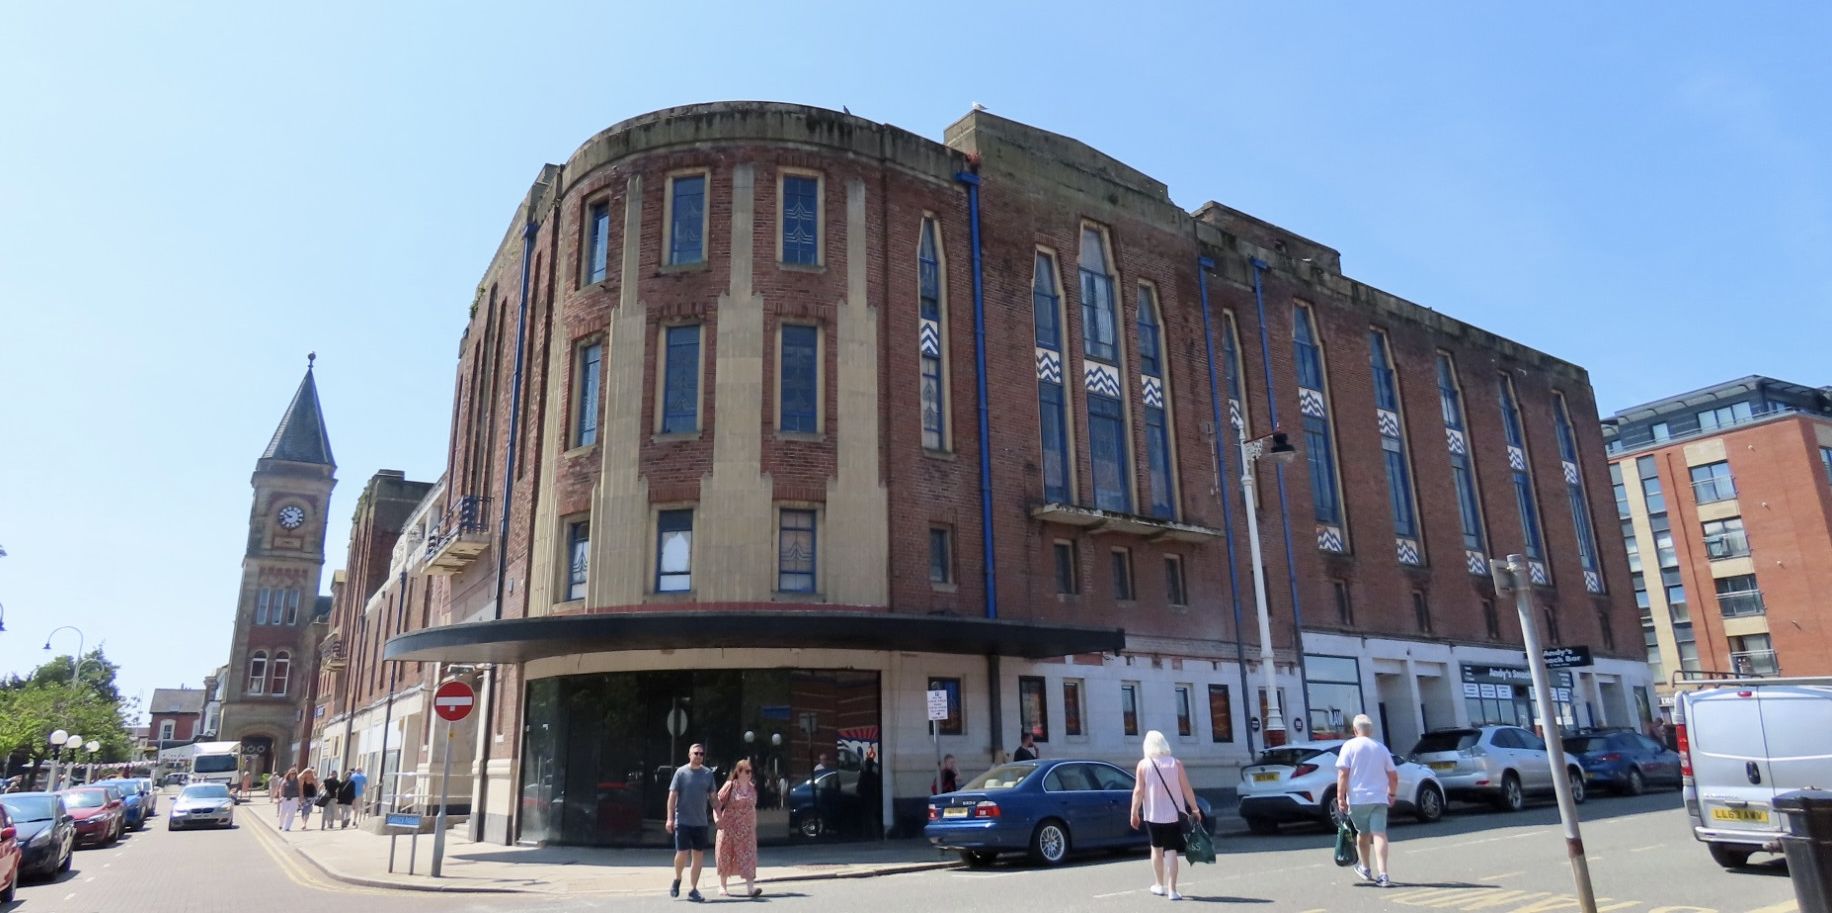 The former Garrick Theatre in Southport. Photo by Andrew Brown Stand Up For Southport